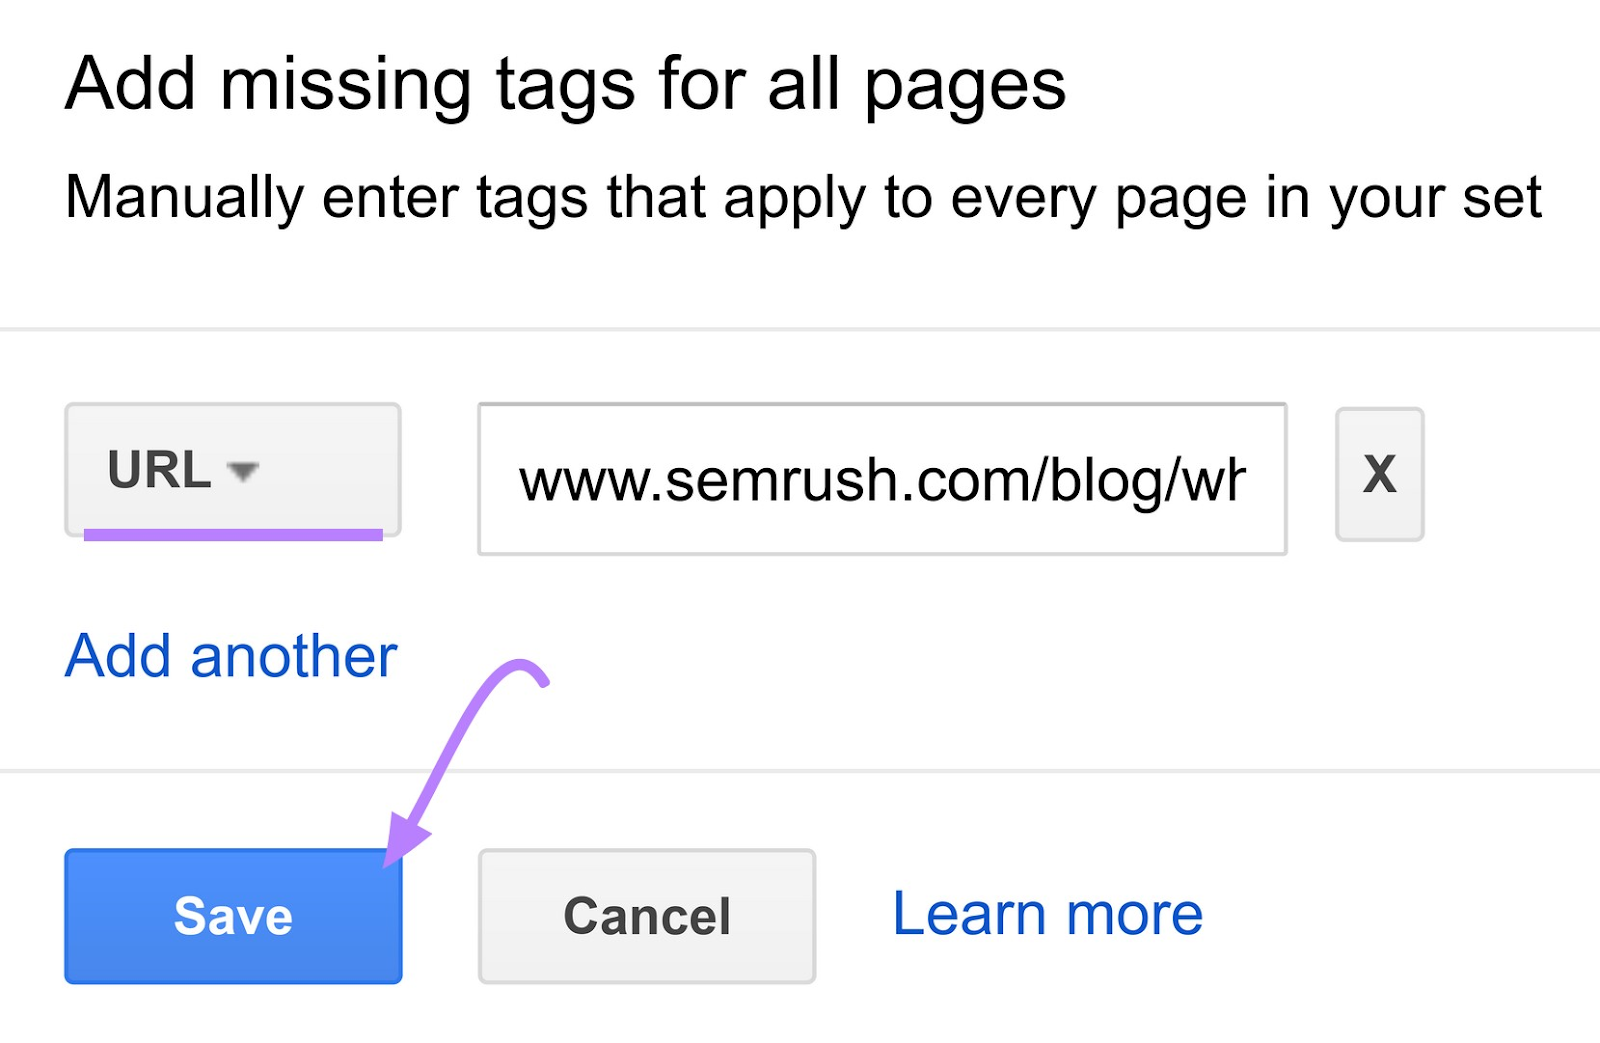 “Add missing tags for all pages” section with data added to the URL tag